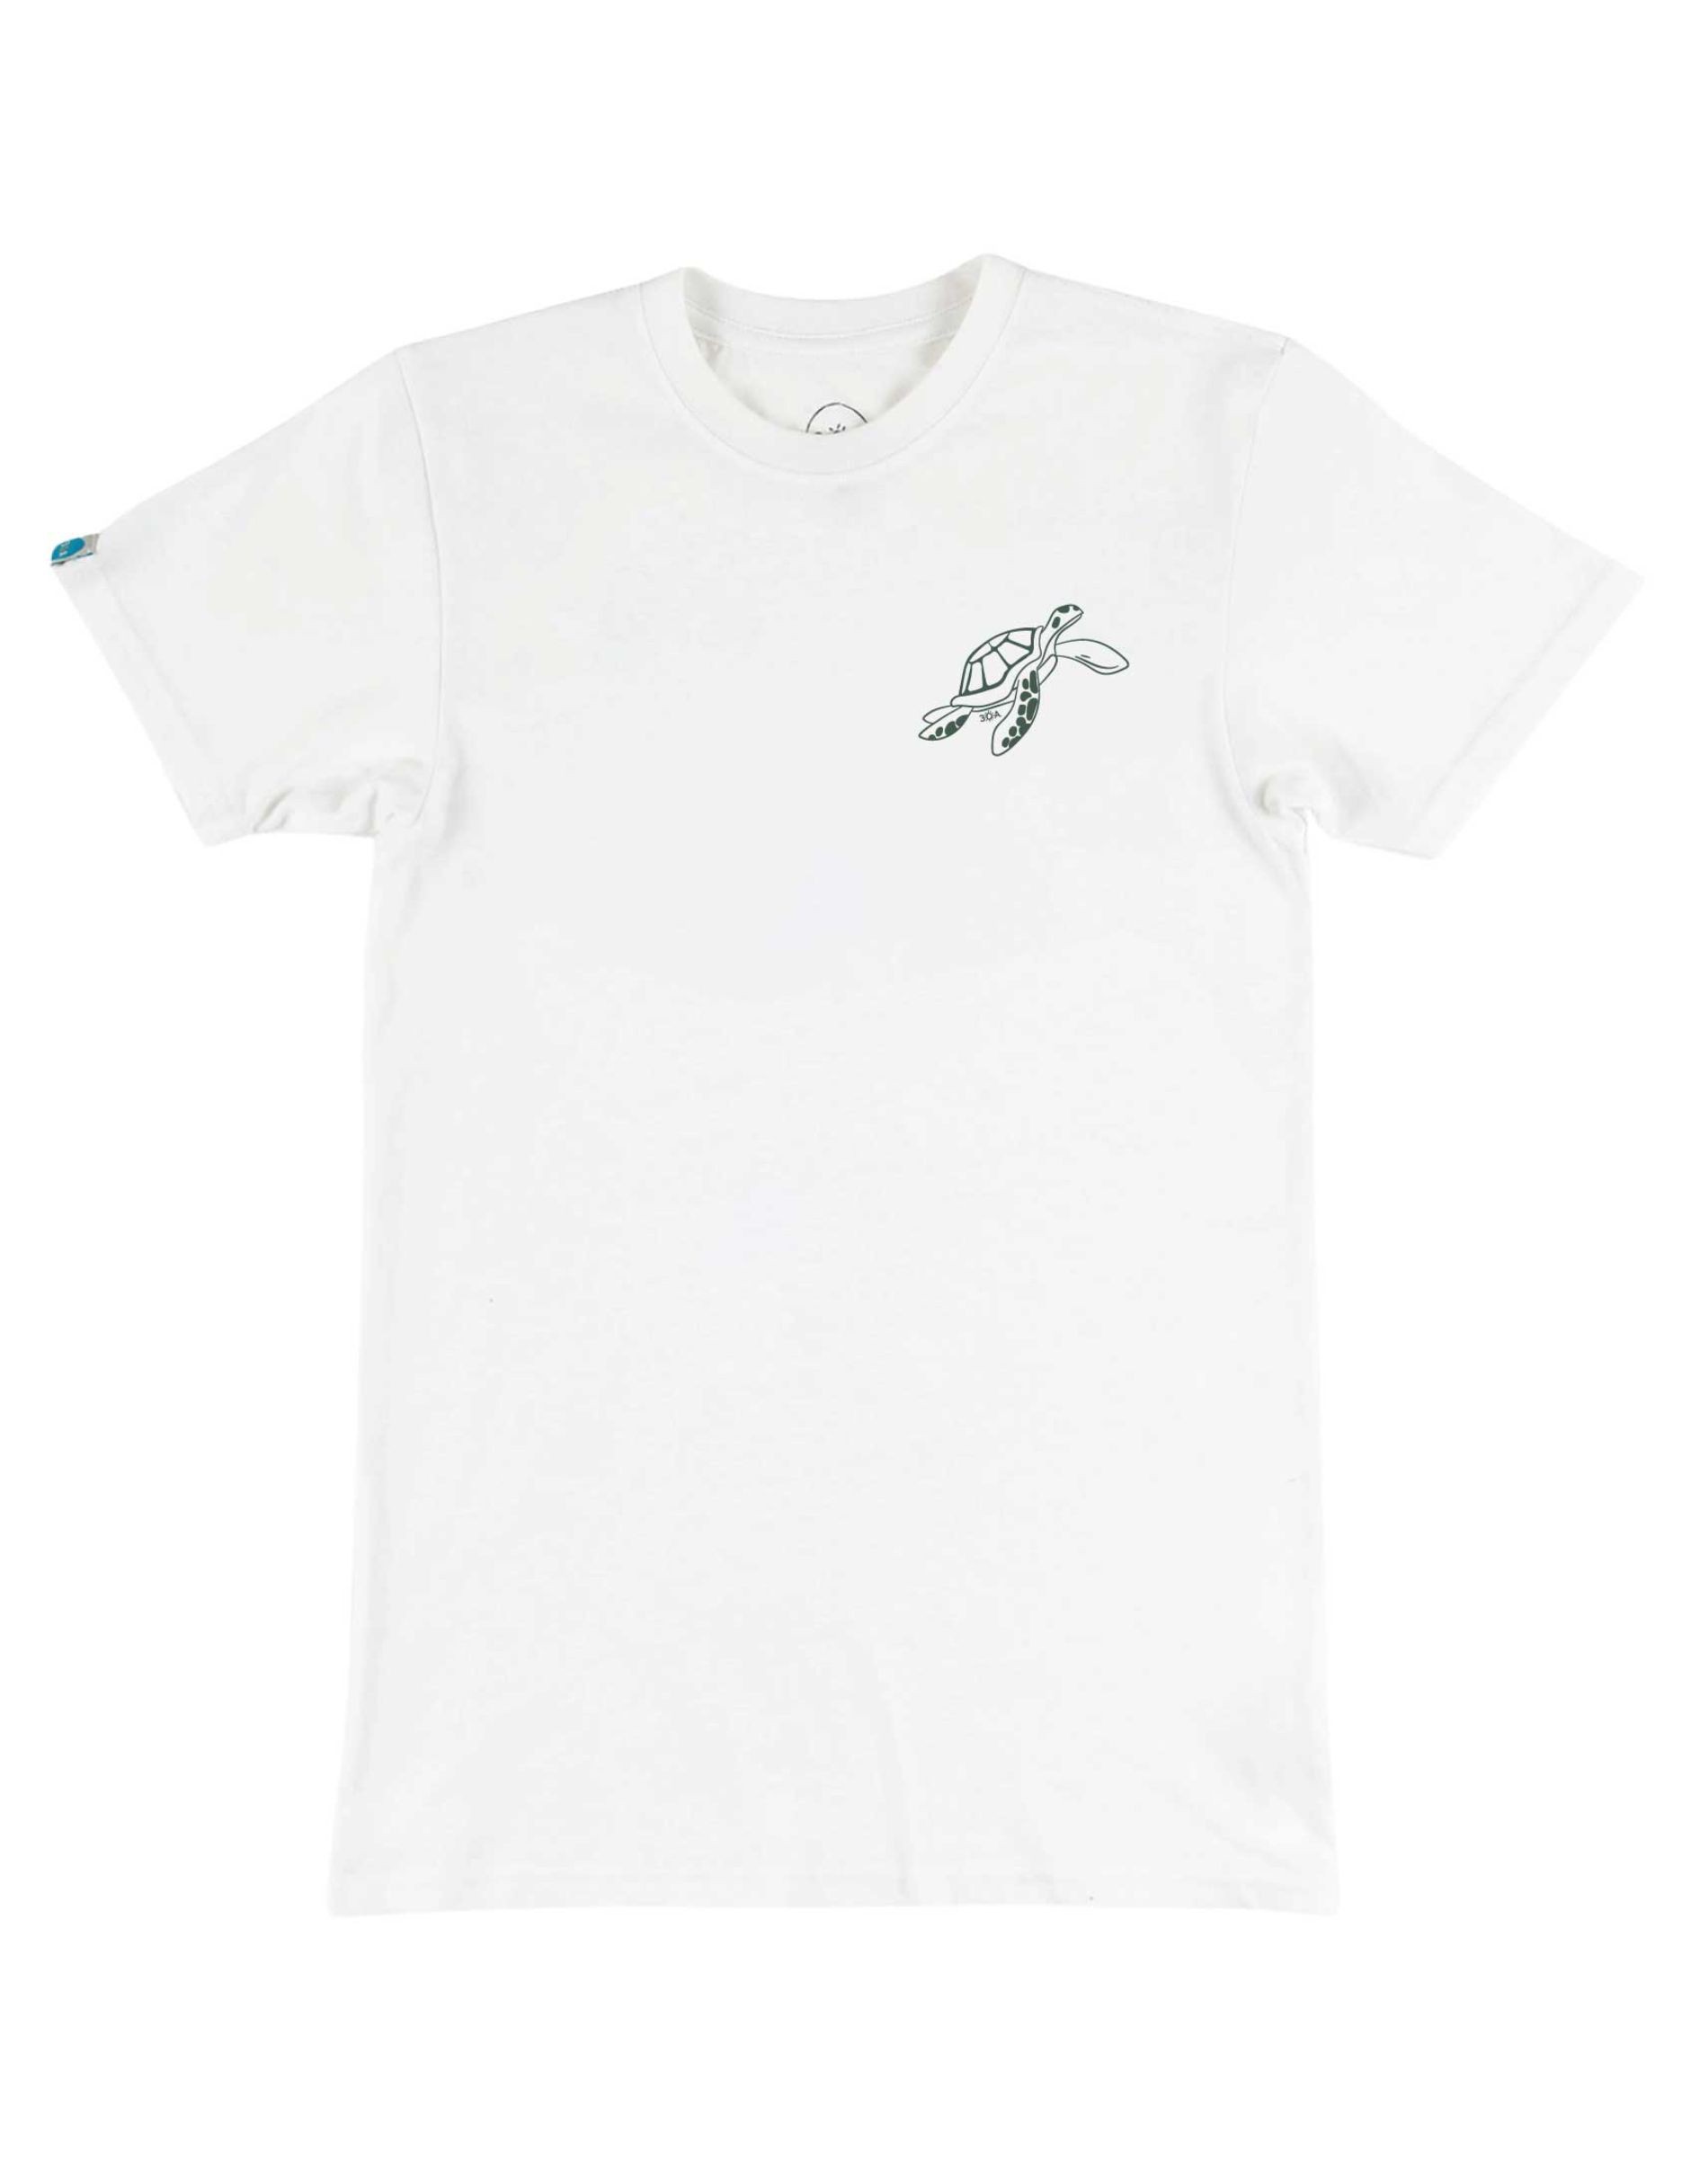 Save The Sea Turtles Men Short Sleeve Tee - White - 30A Gear